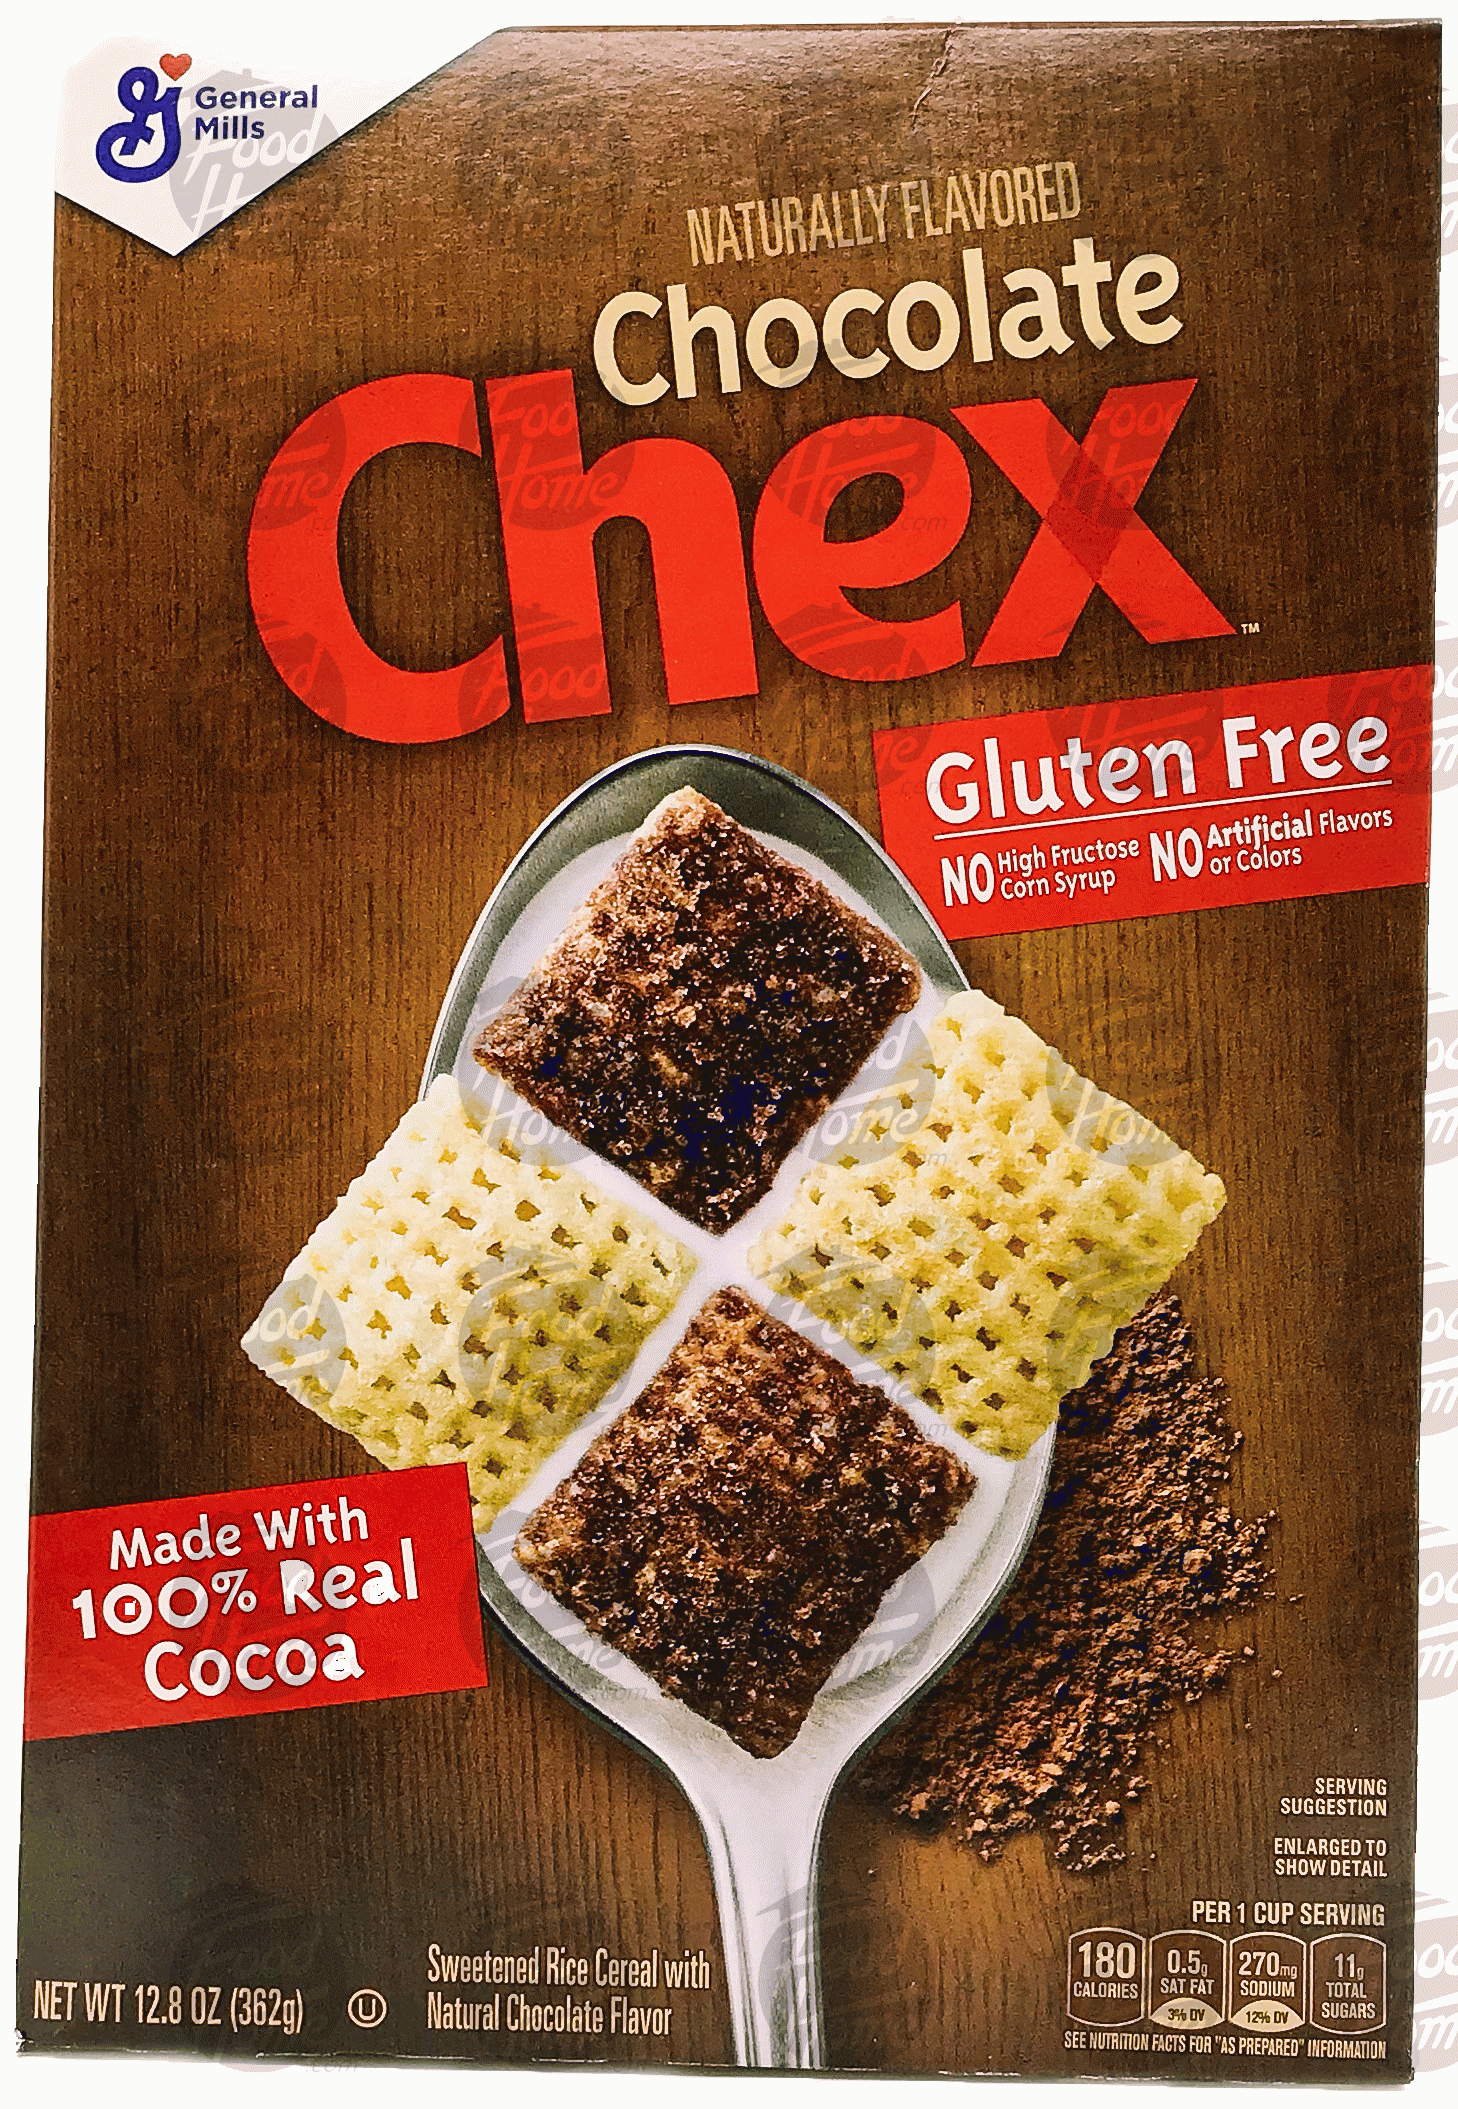 General Mills Chocolate Chex sweetened rice cereal w/ chocolate flavor, box Full-Size Picture